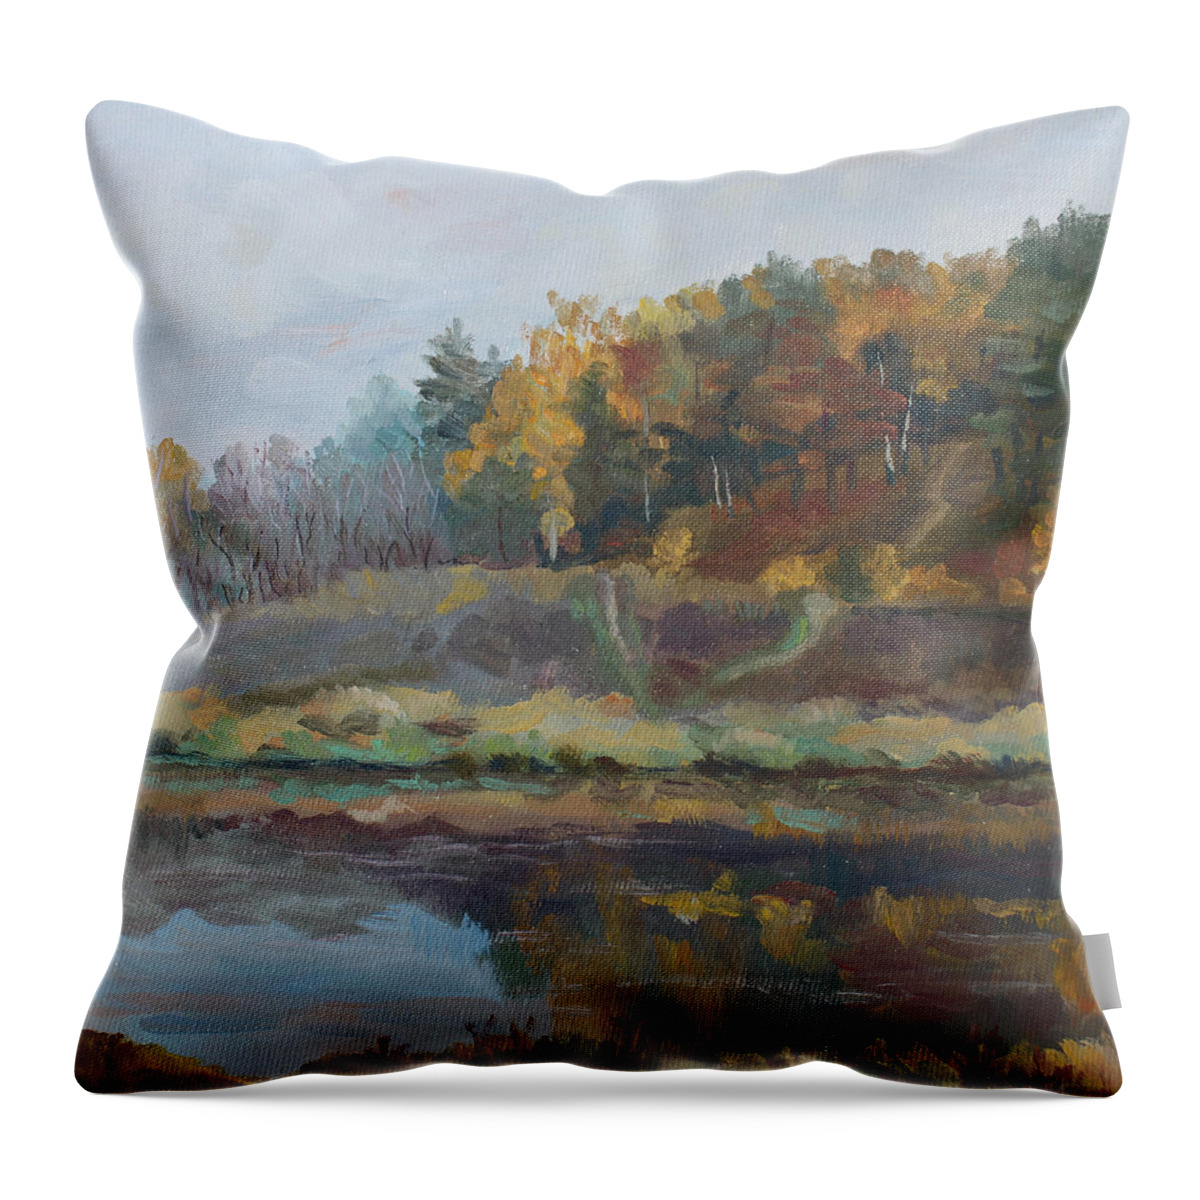 Autumn Throw Pillow featuring the painting Moments Before Rain by Alina Malykhina